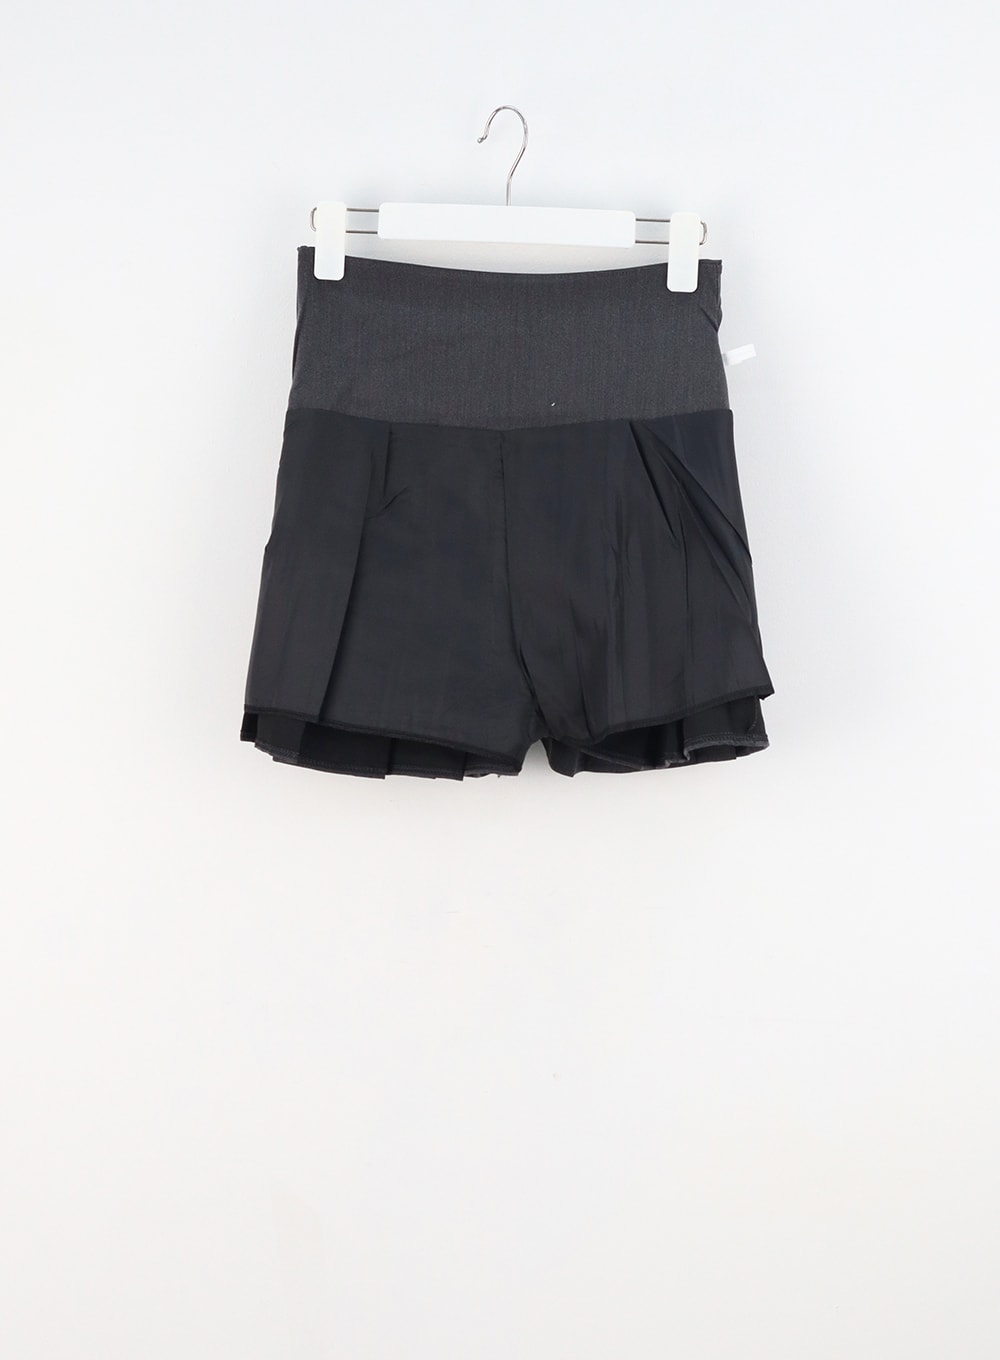 Pleated Skirt With Built-In Short - Yitty